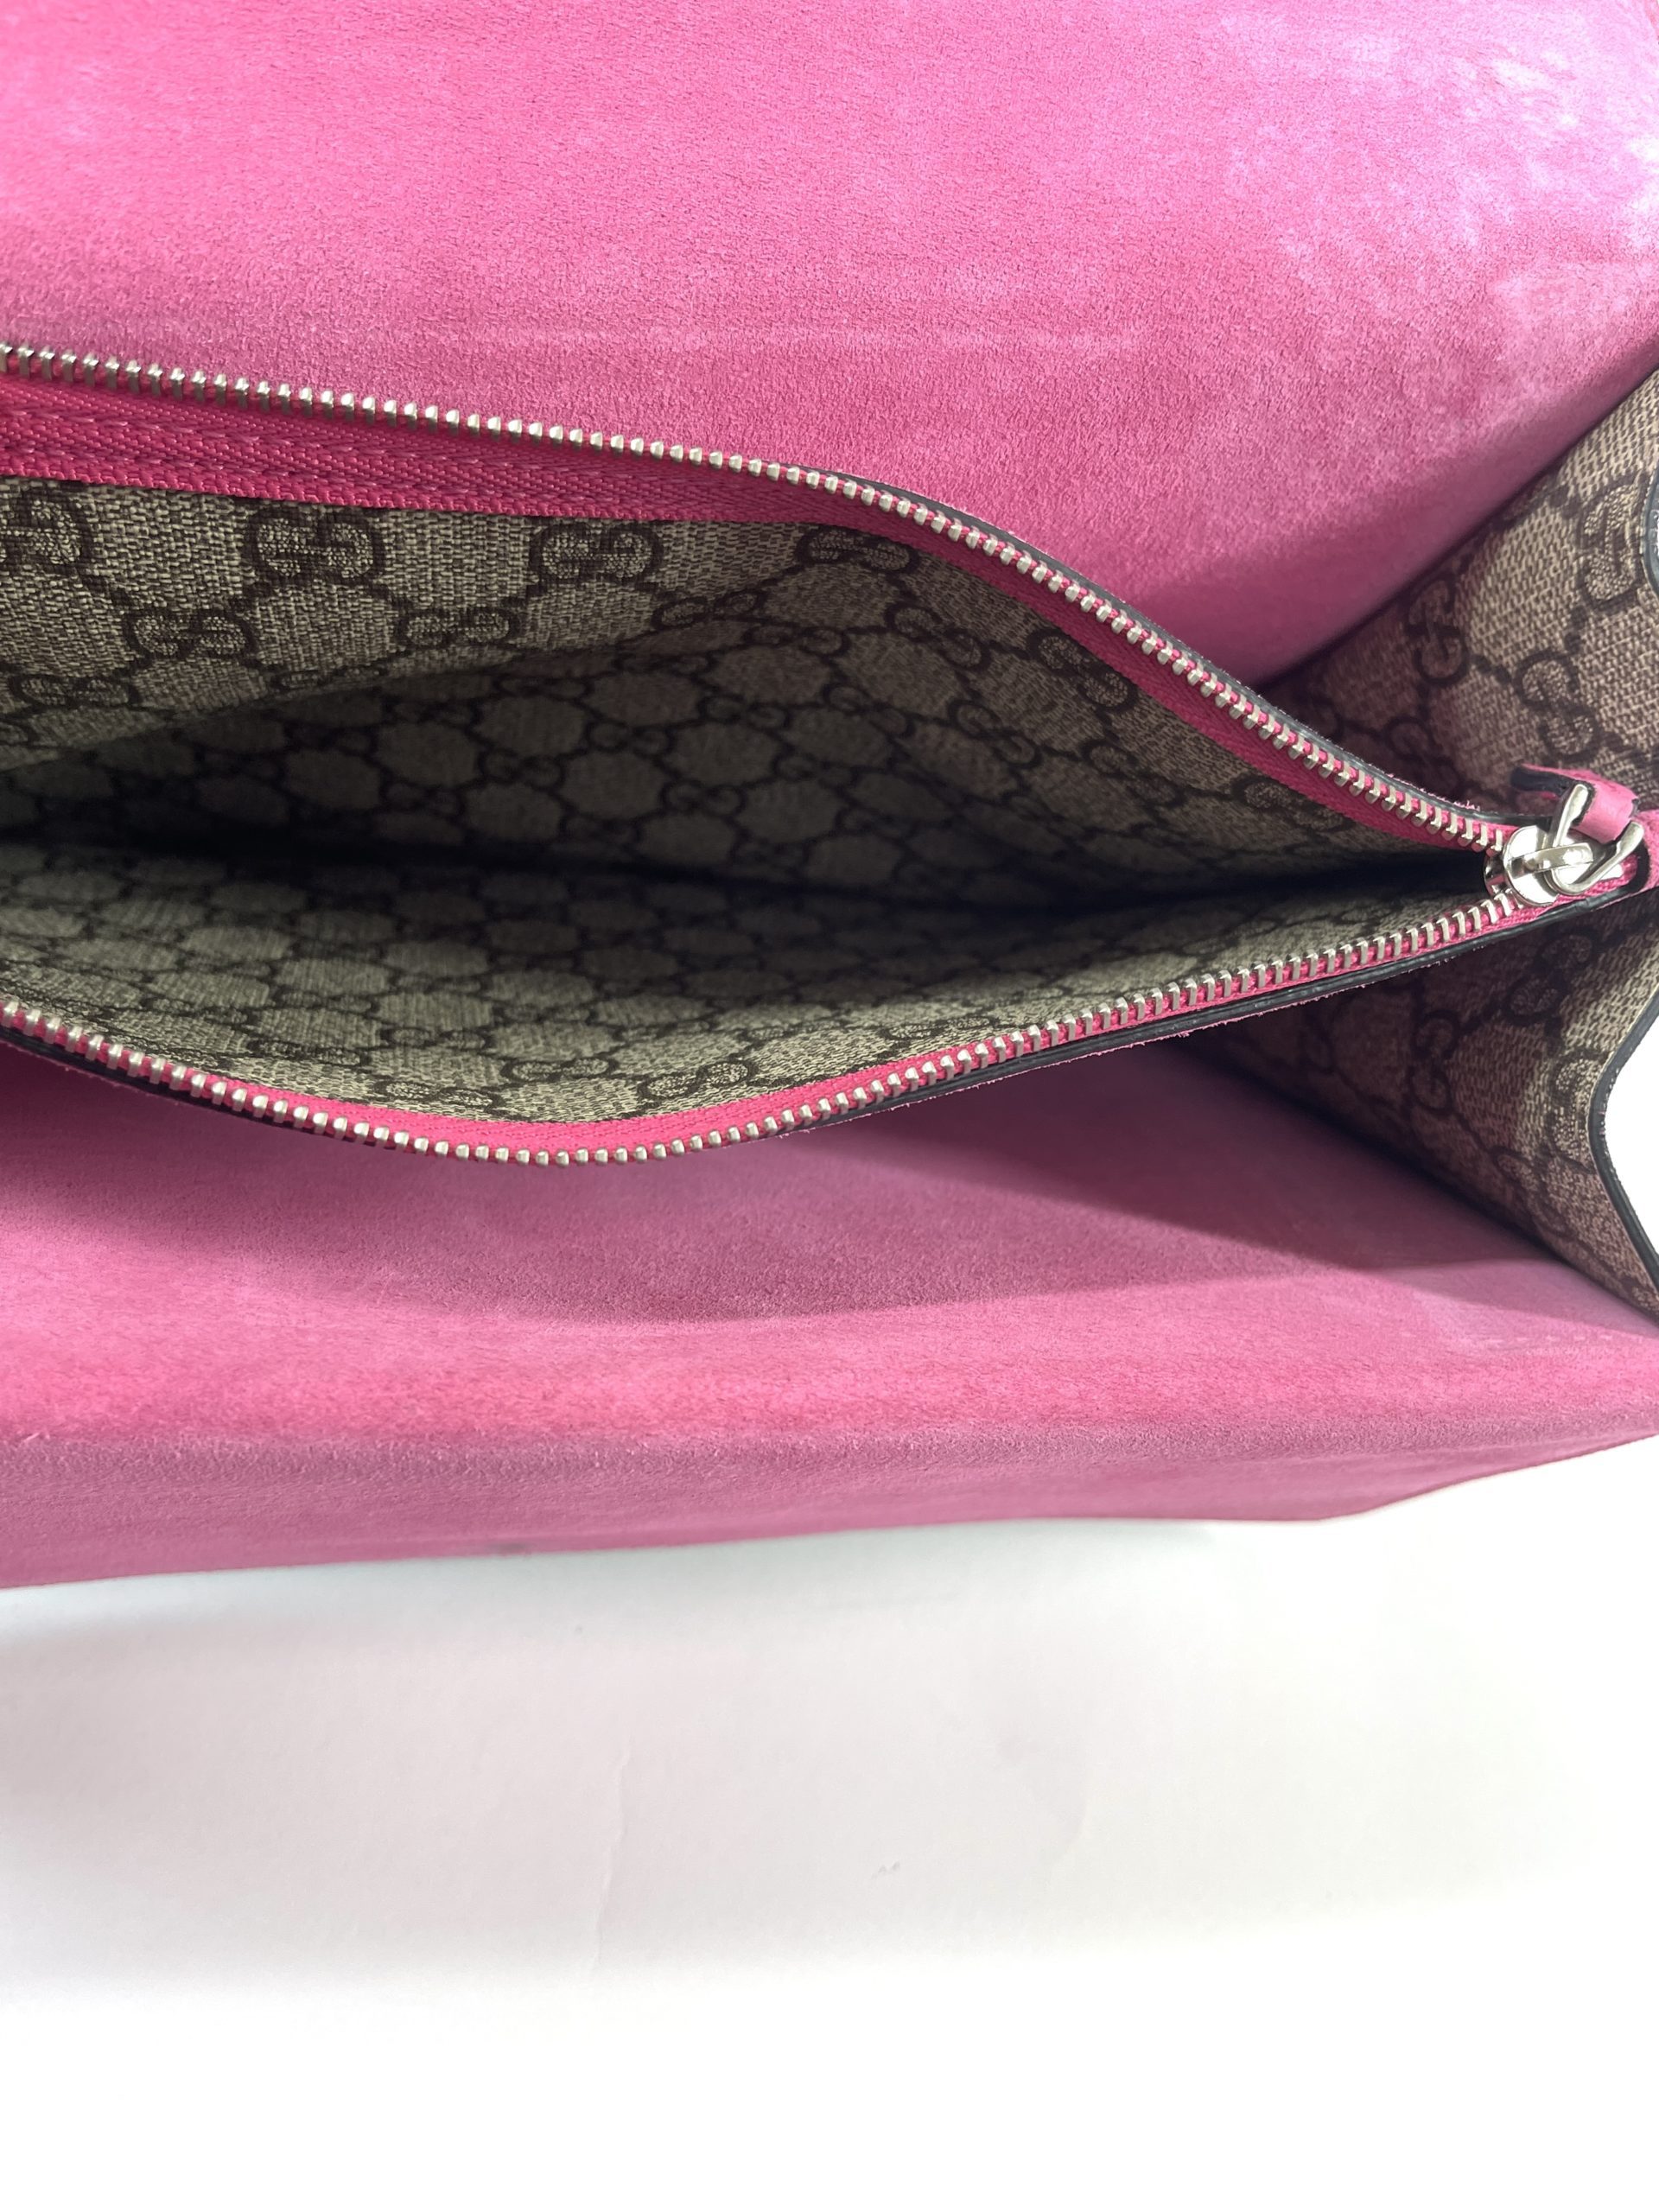 Gucci Purses & Wallets for Women, Dionysus